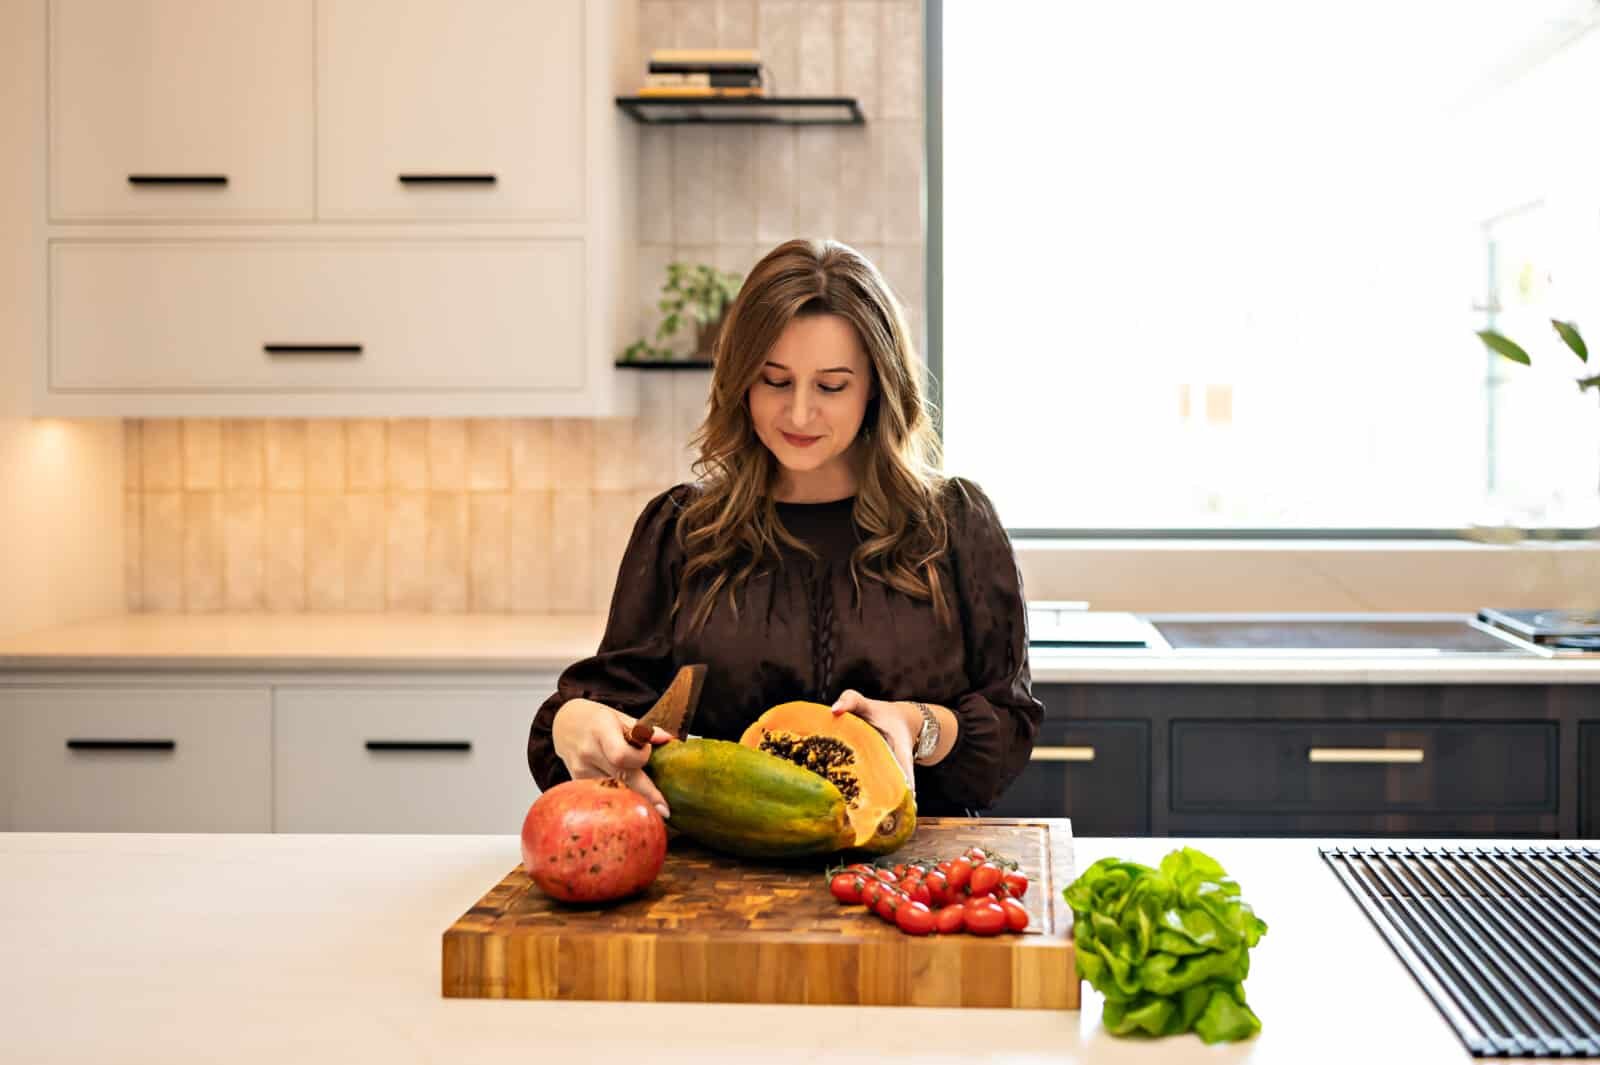 marina cutting open a papaya on a wooden board with a pomegranate cherry tomatoes and greens on the side in her kitchen.